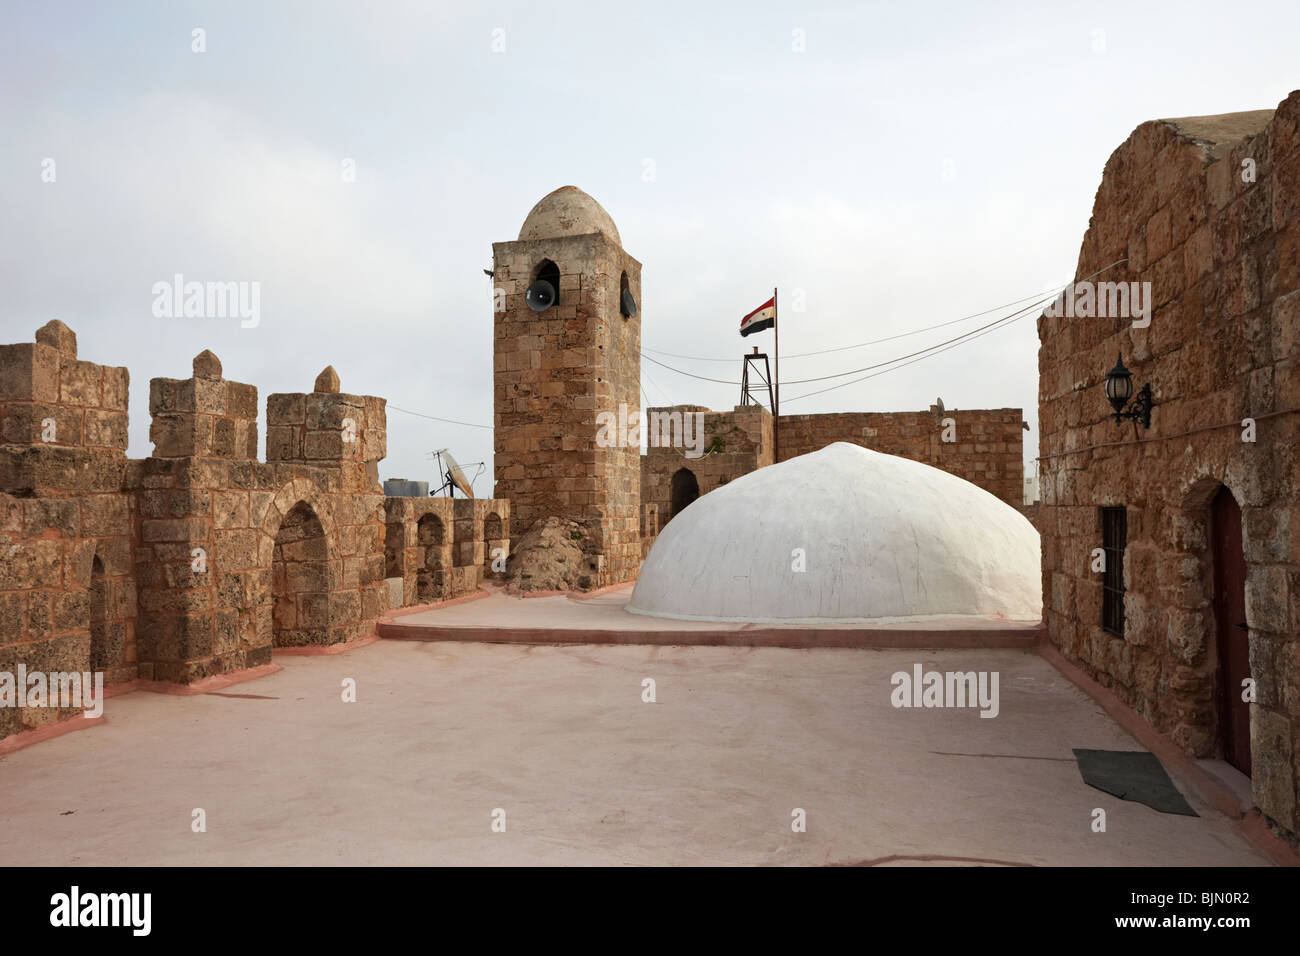 Syria Arwad island the fort roof and mosque domes Stock Photo